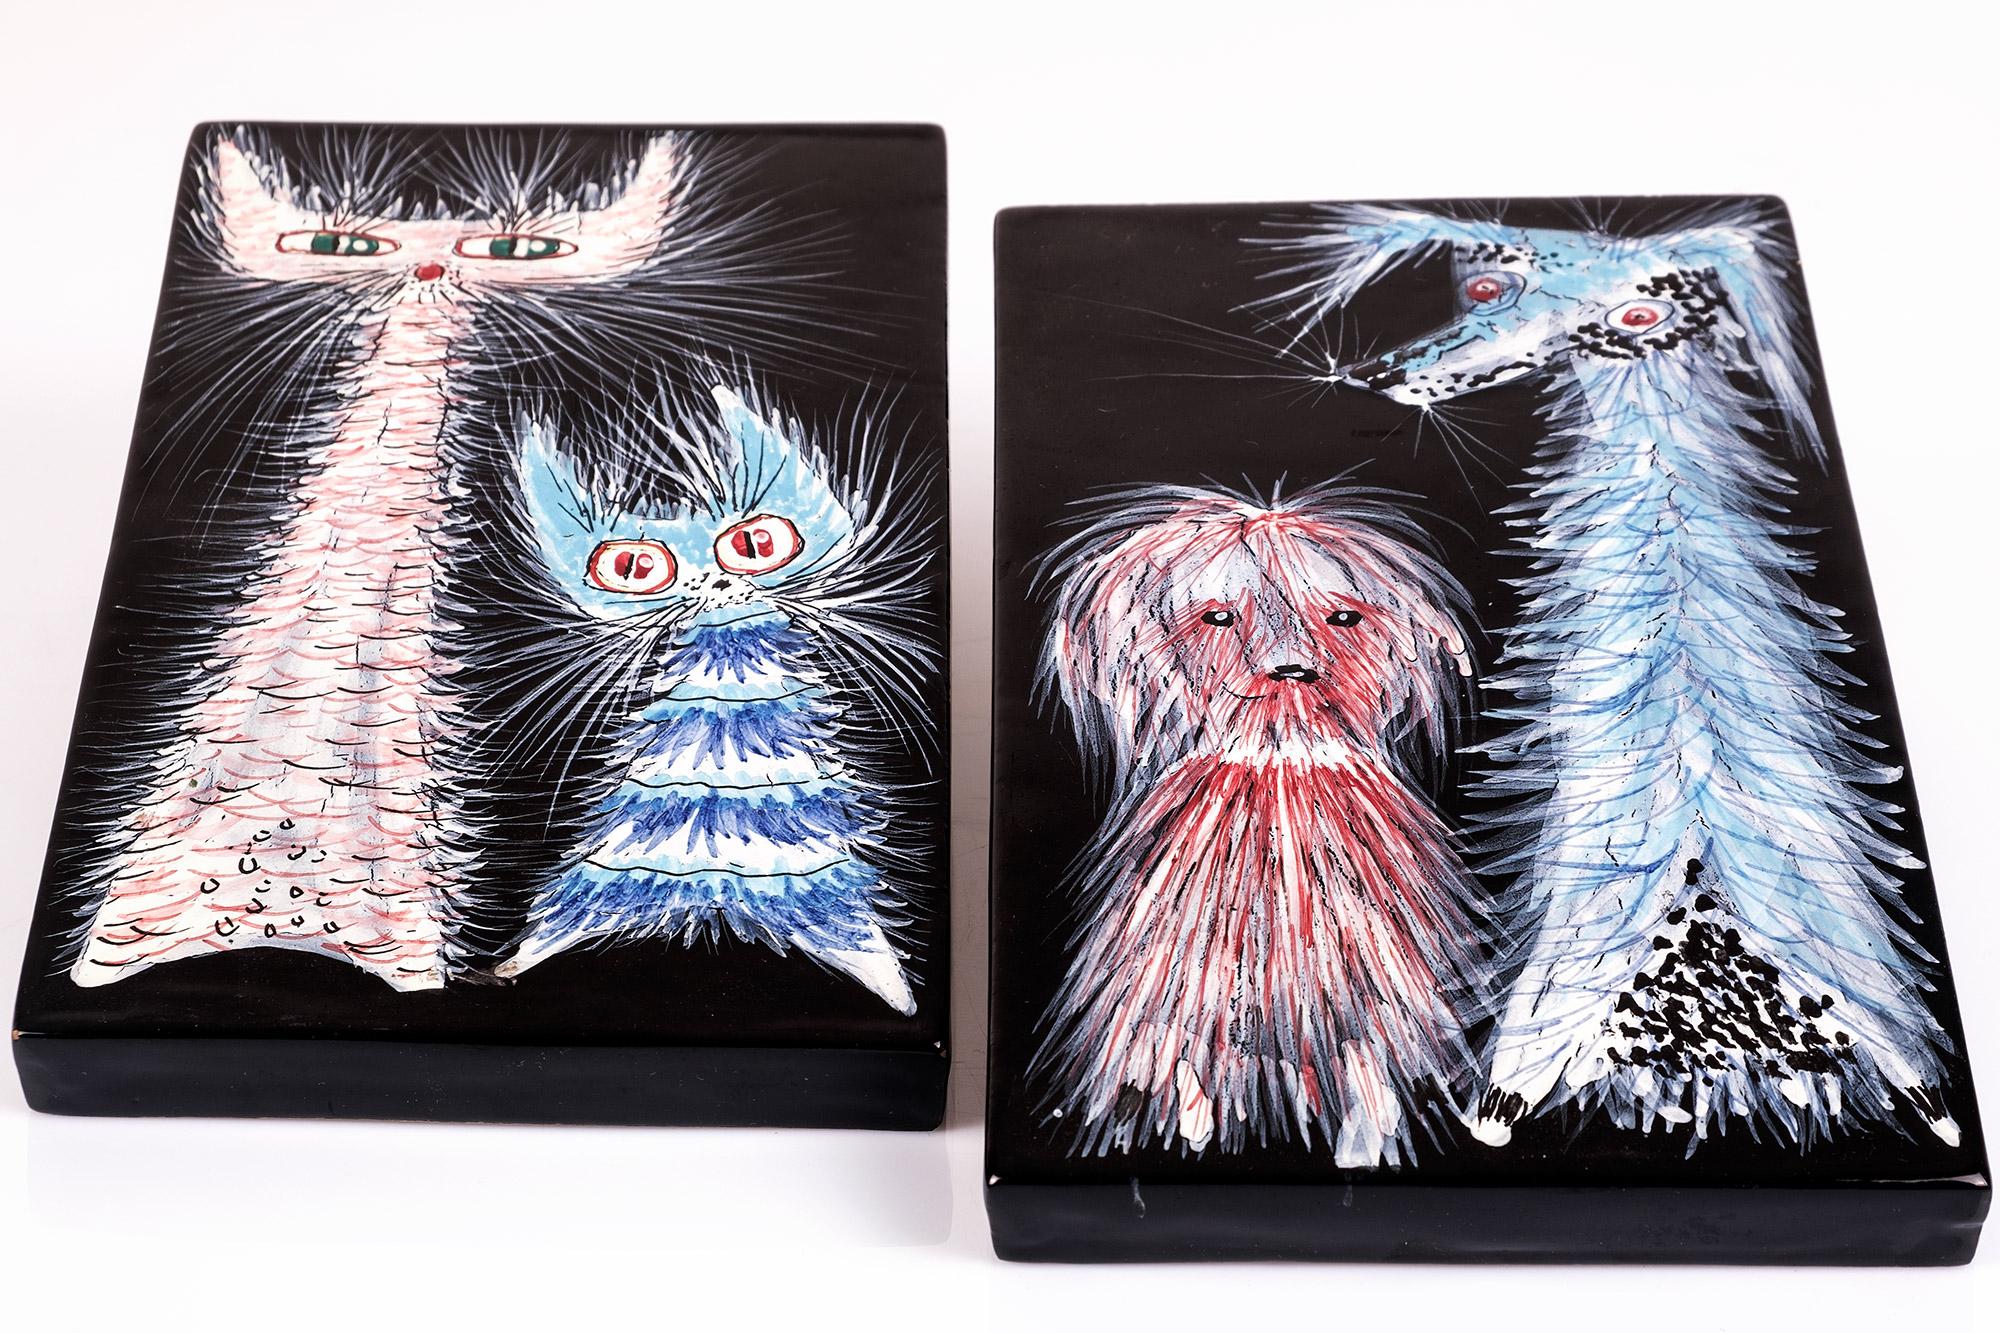 Splendid ceramic plates with polychromed figures of cats and dogs designed by Otello Rosa for San Polo, Venezia, 1950's
Marked San Polo and numbered A485-2/A486-2.